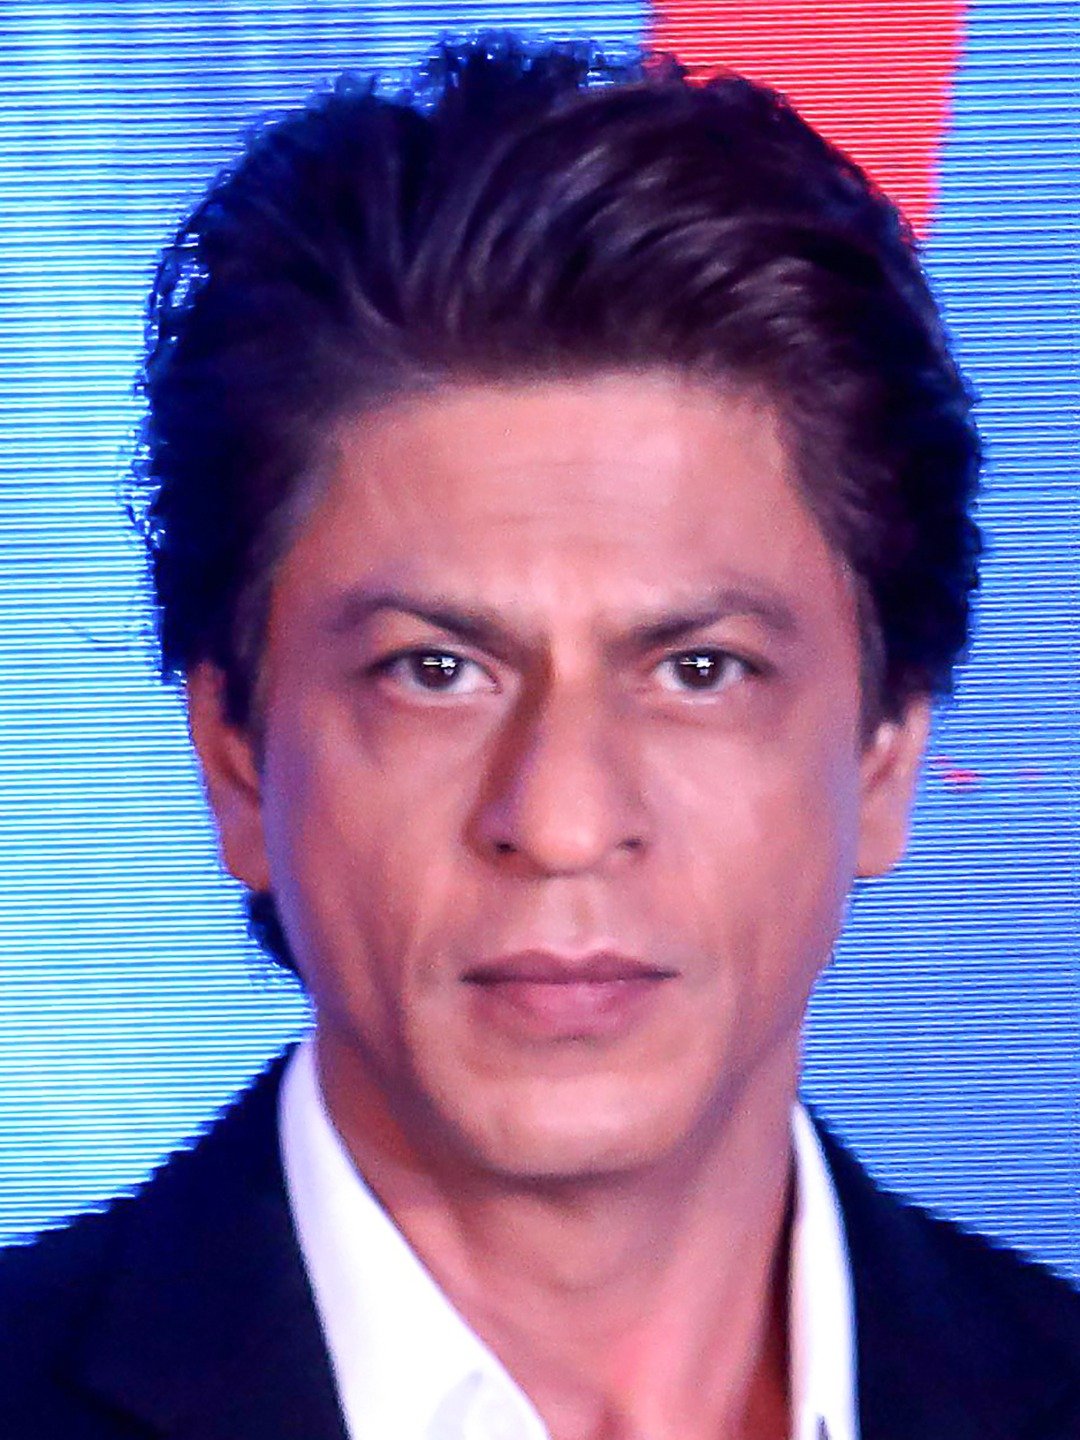 Incredible Collection Of Over 999 High Quality Shahrukh Khan Images In Stunning 4k Resolution